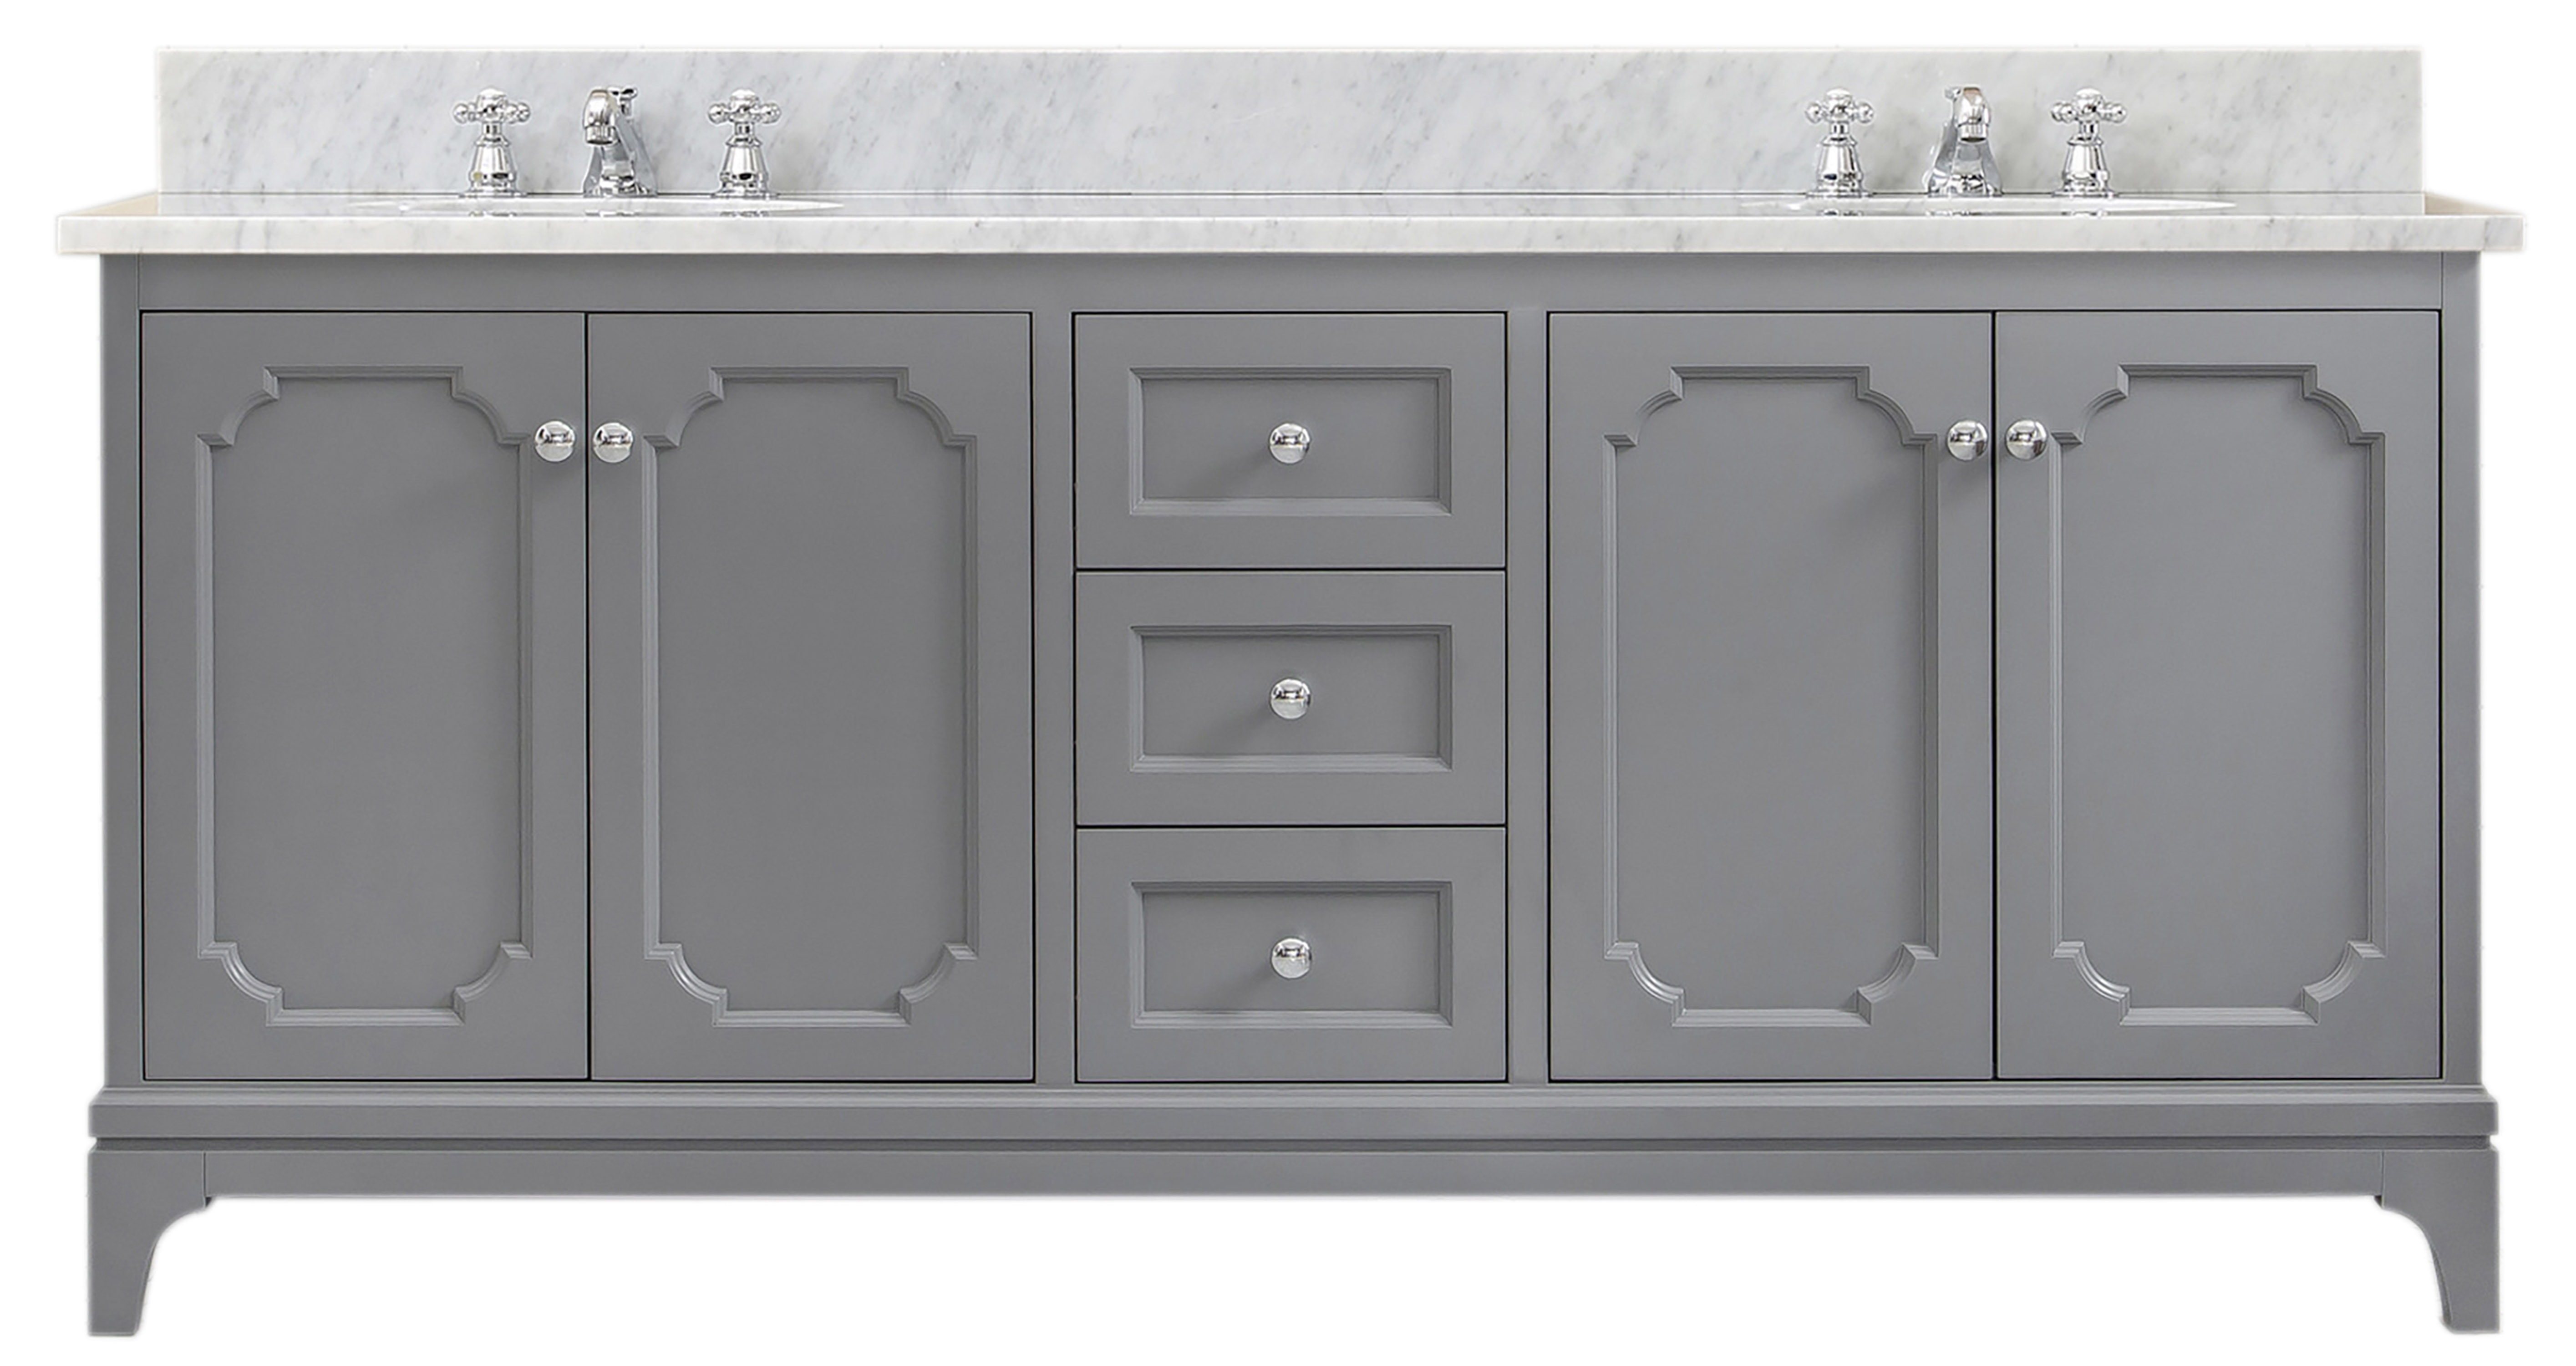 72" Double Sink Carrara White Marble Countertop Vanity in Cashmere Grey with Mirror and Faucet Options